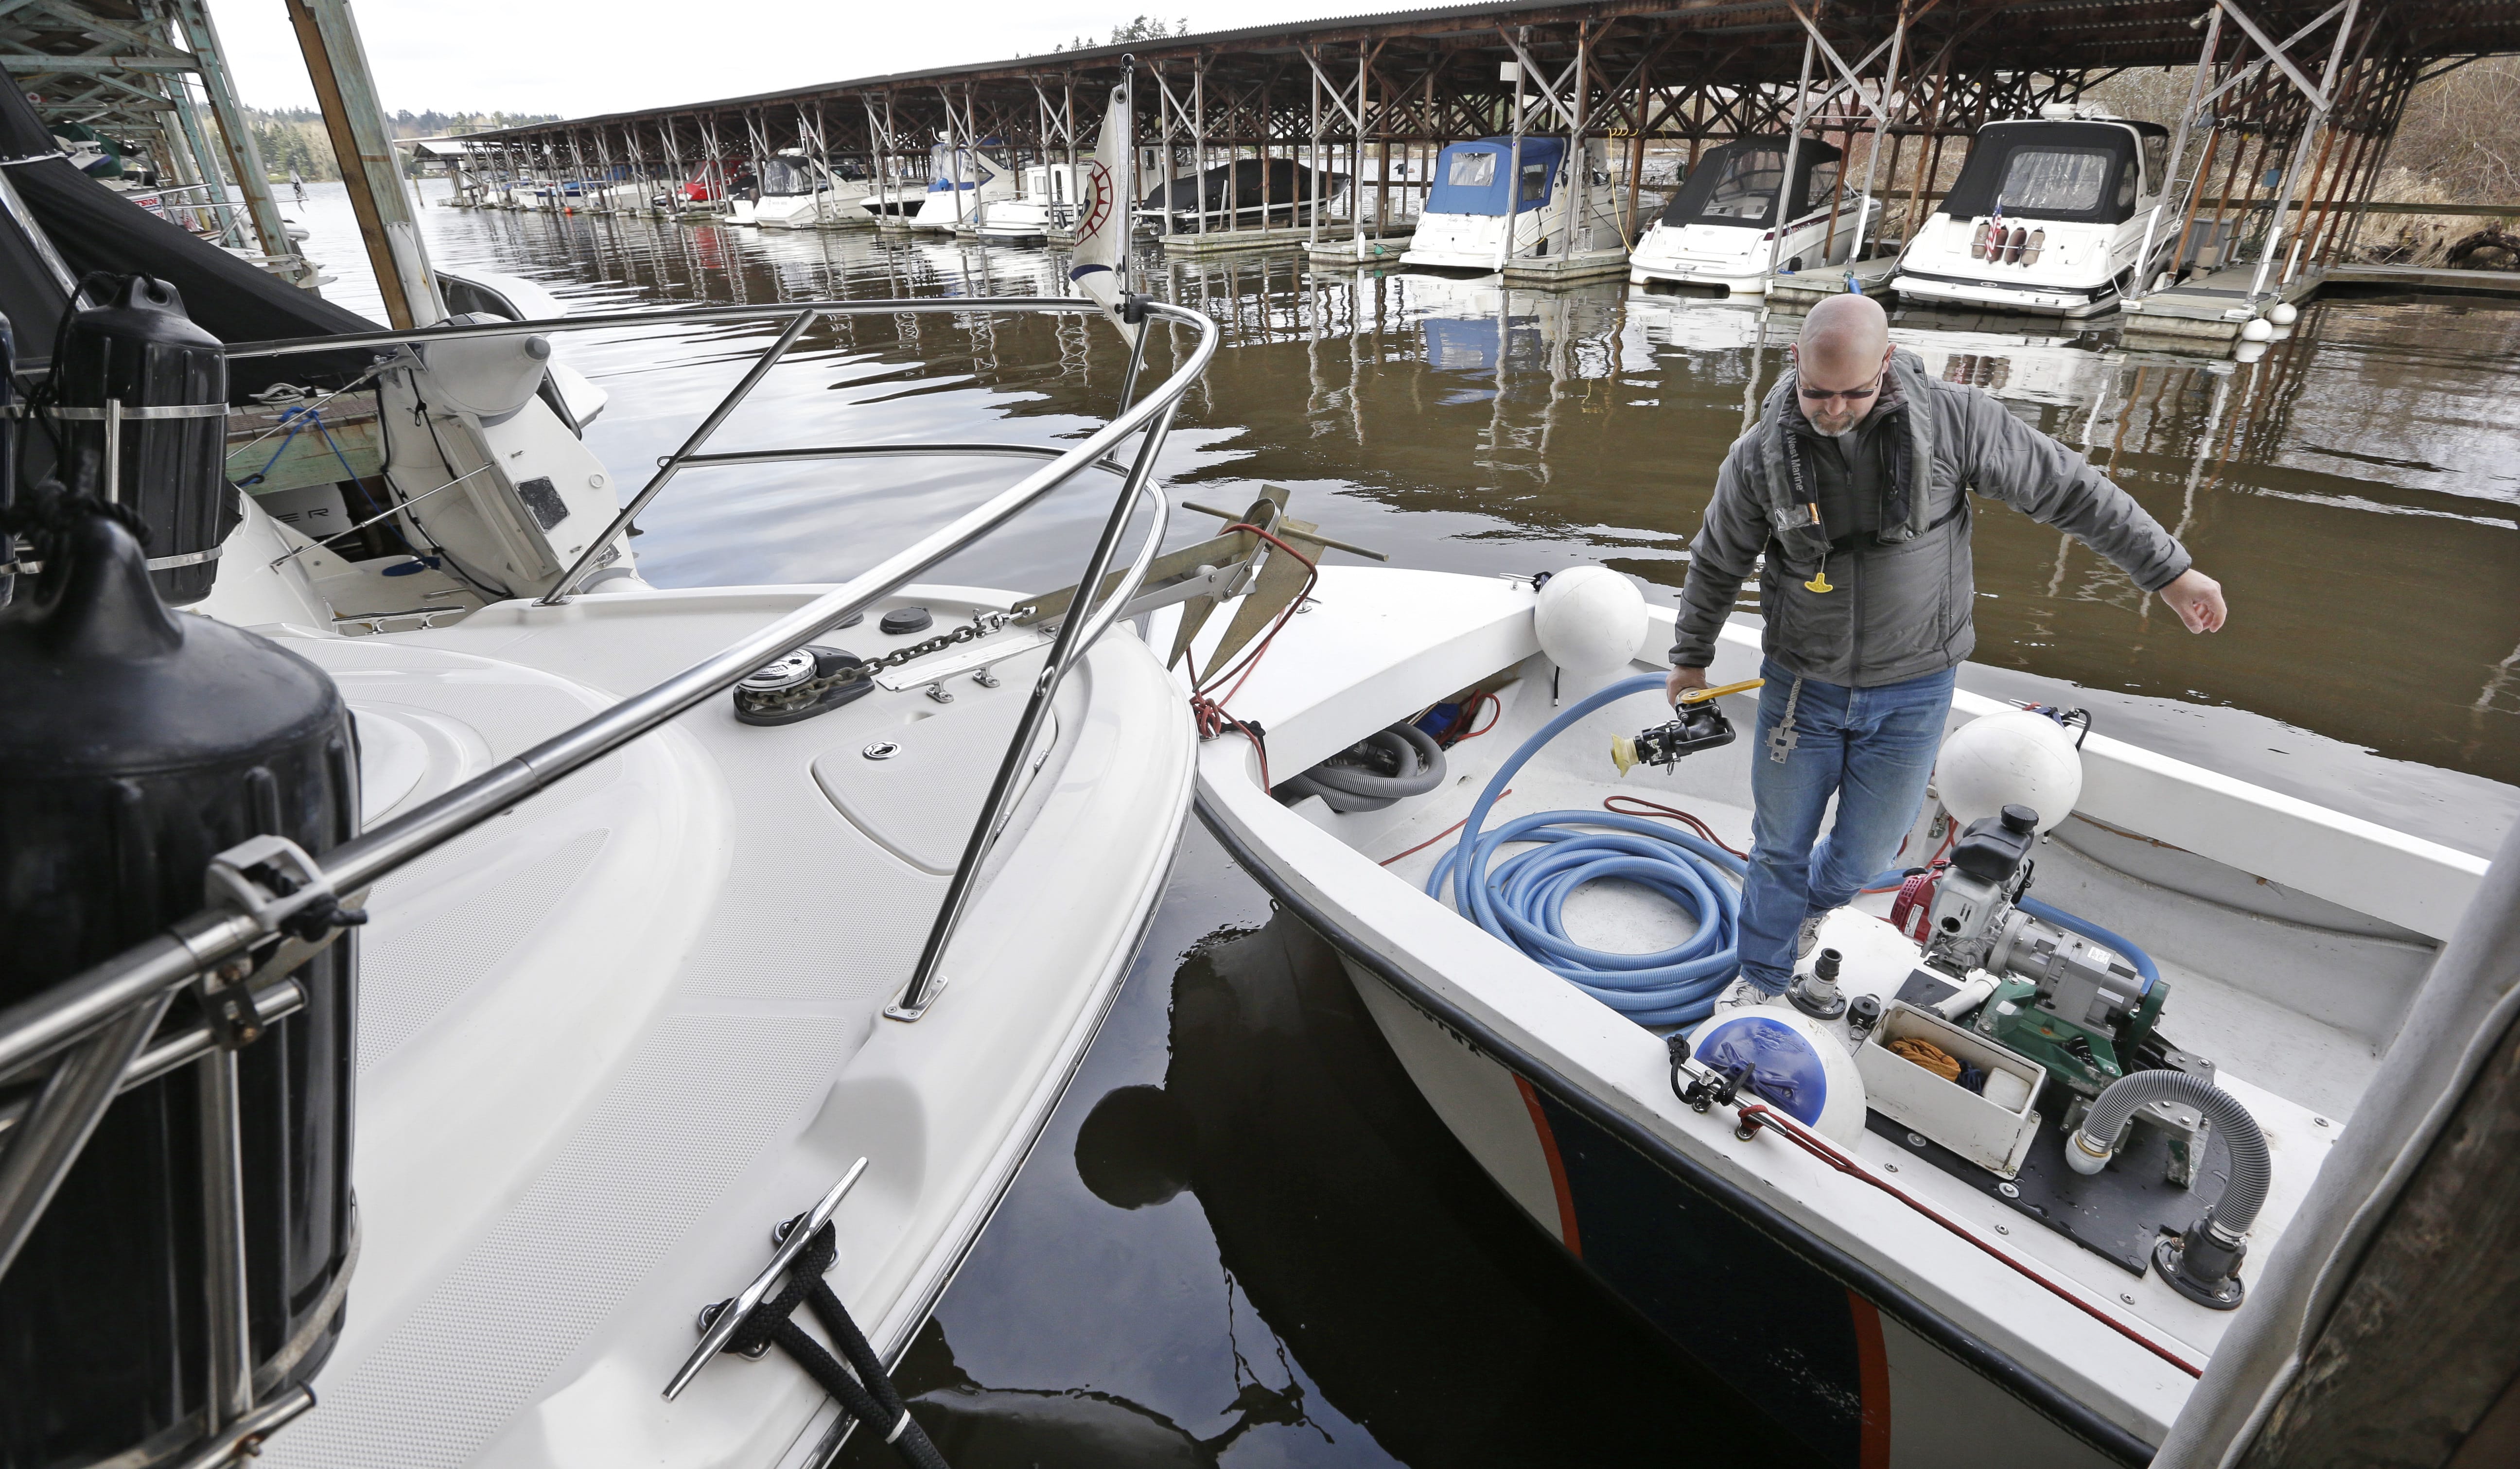 FILE - In this Feb. 19, 2014, file photo, Terry Durfee prepares his equipment to pump sewage out of a holding tank of a pleasure boat moored in Lake Washington and into his smaller boat for transport to a waste facility, in Bellevue, Wash. Recreational and commercial vessels will not be able to release treated or untreated sewage into Puget Sound waters under new rules approved by the state. The Department of Ecology on Monday, April 9, 2018, officially designated a new "no discharge zone" in Puget Sound to improve water quality and protect shellfish beds and swimming beaches from harmful bacteria. The new rules begin May 10.